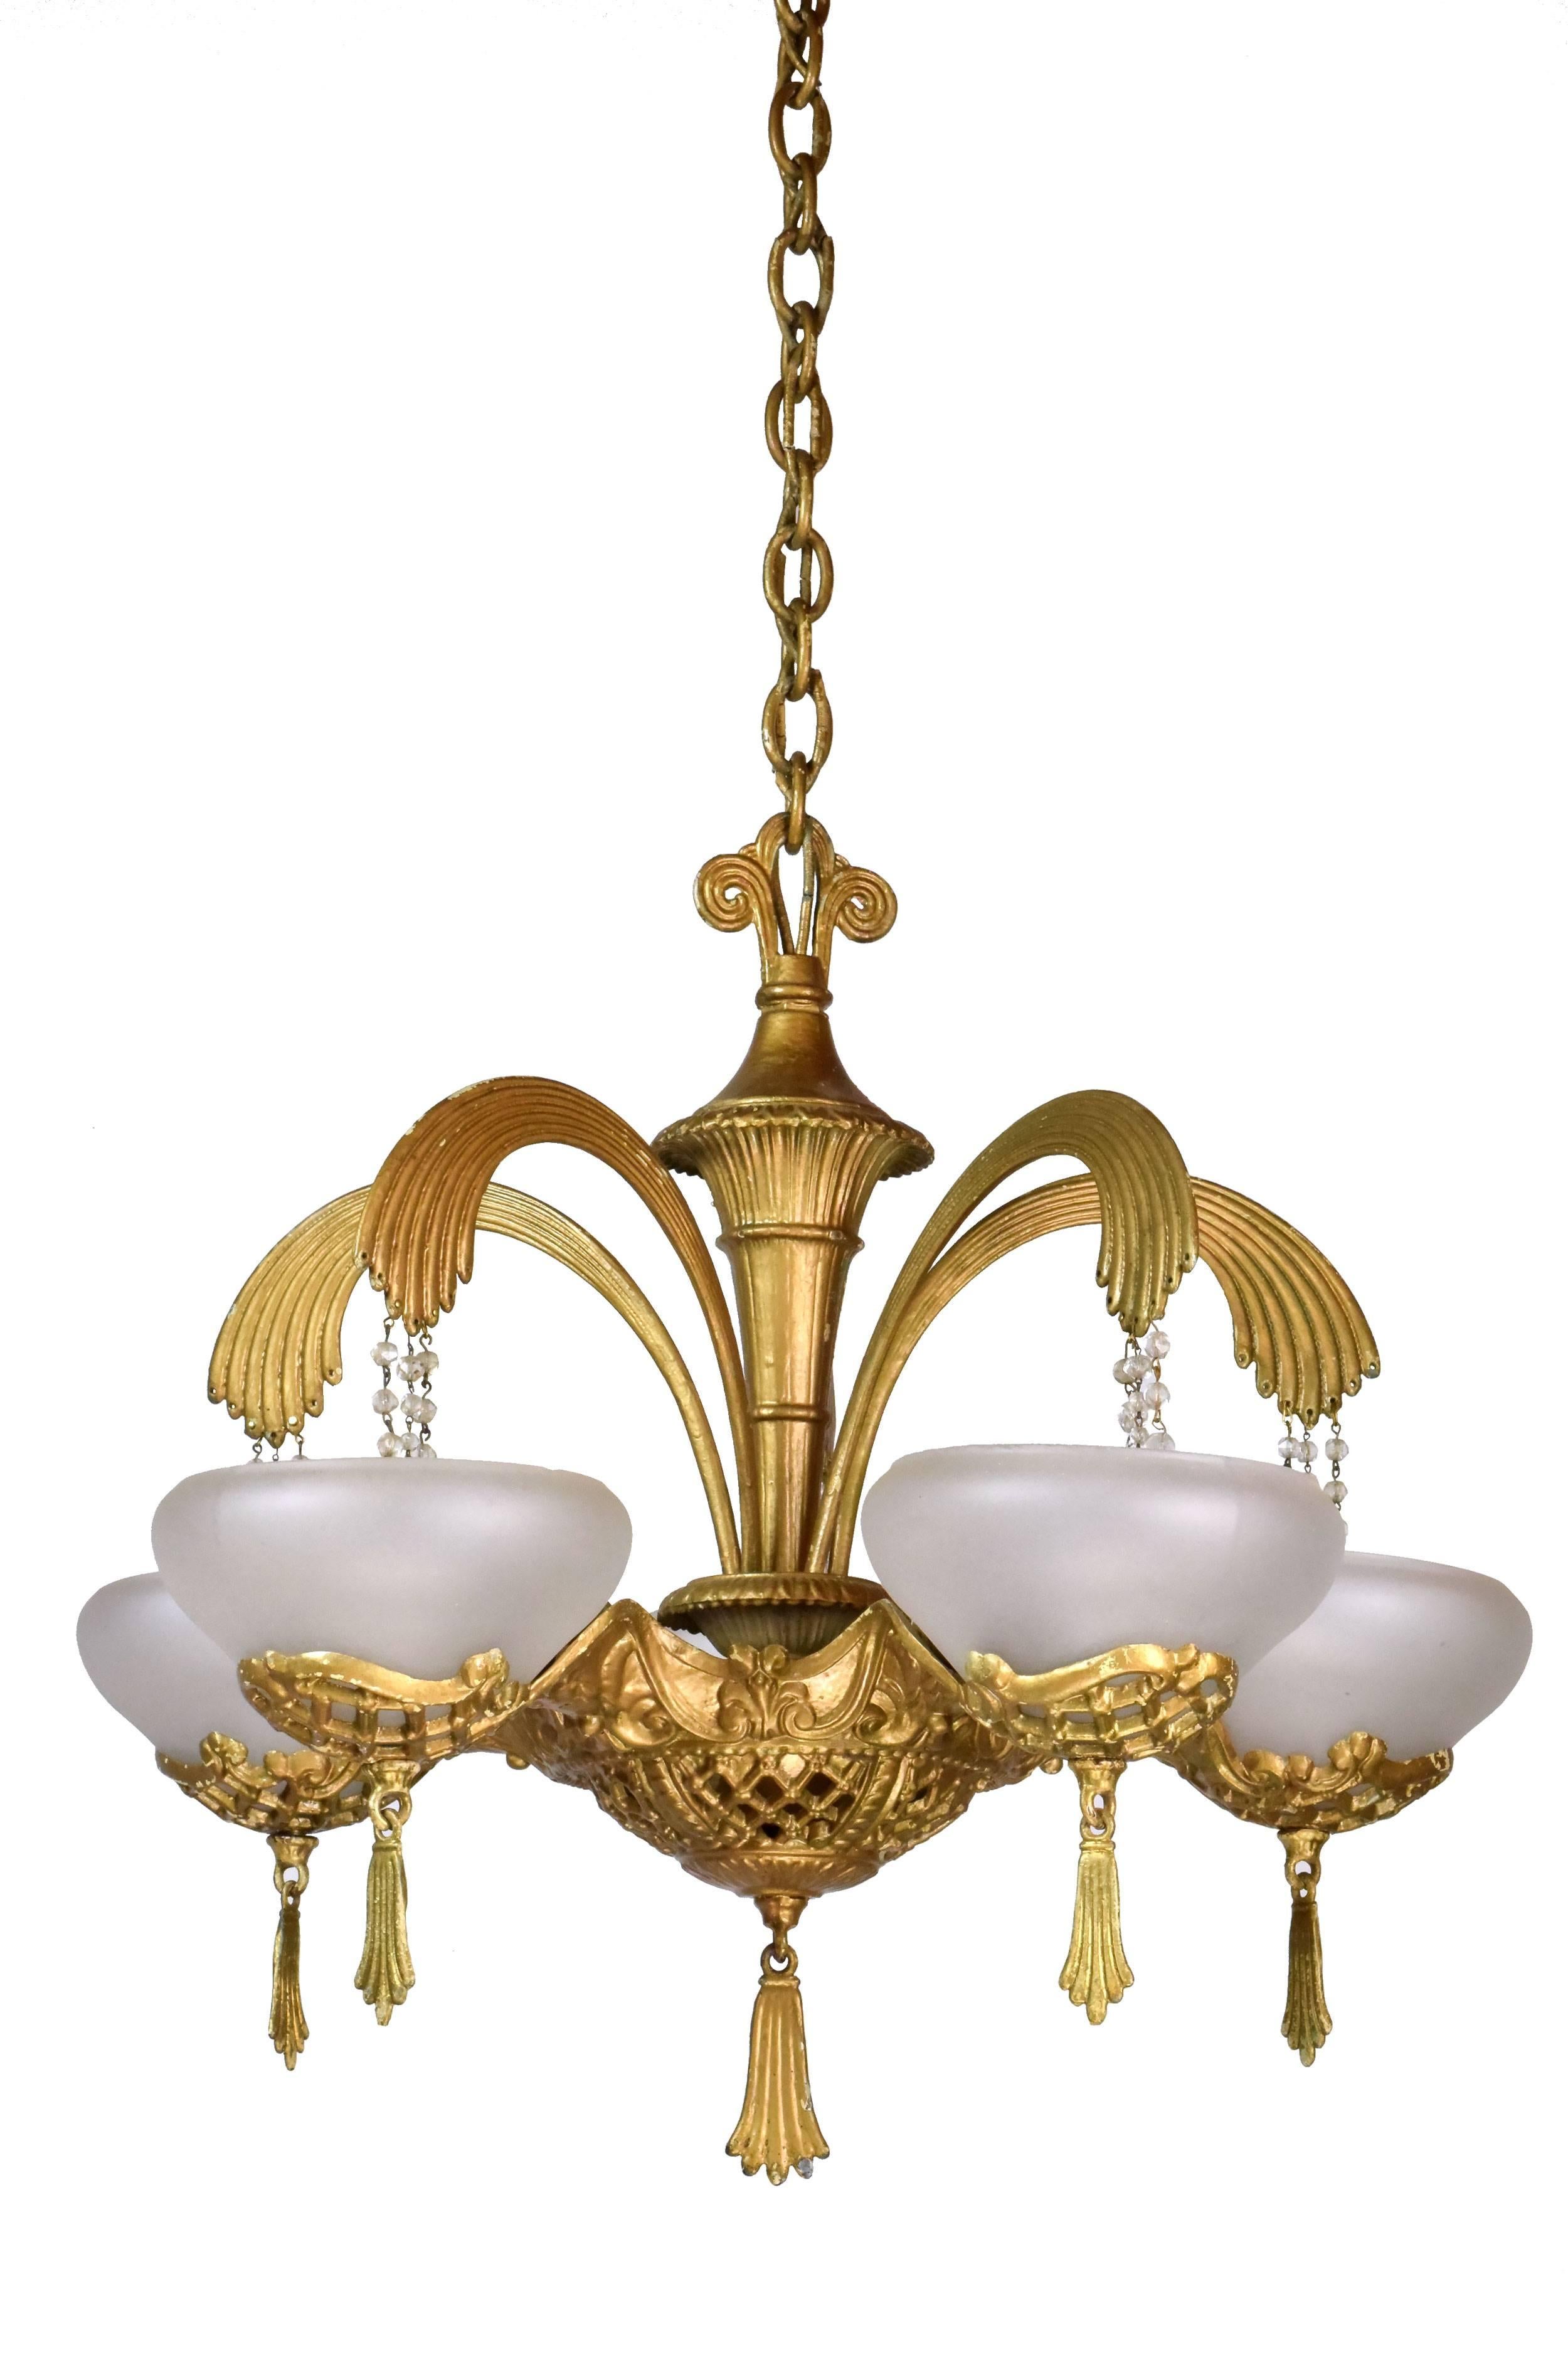 Mid-20th Century Art Deco Five Arm Brass Chandelier with Shades